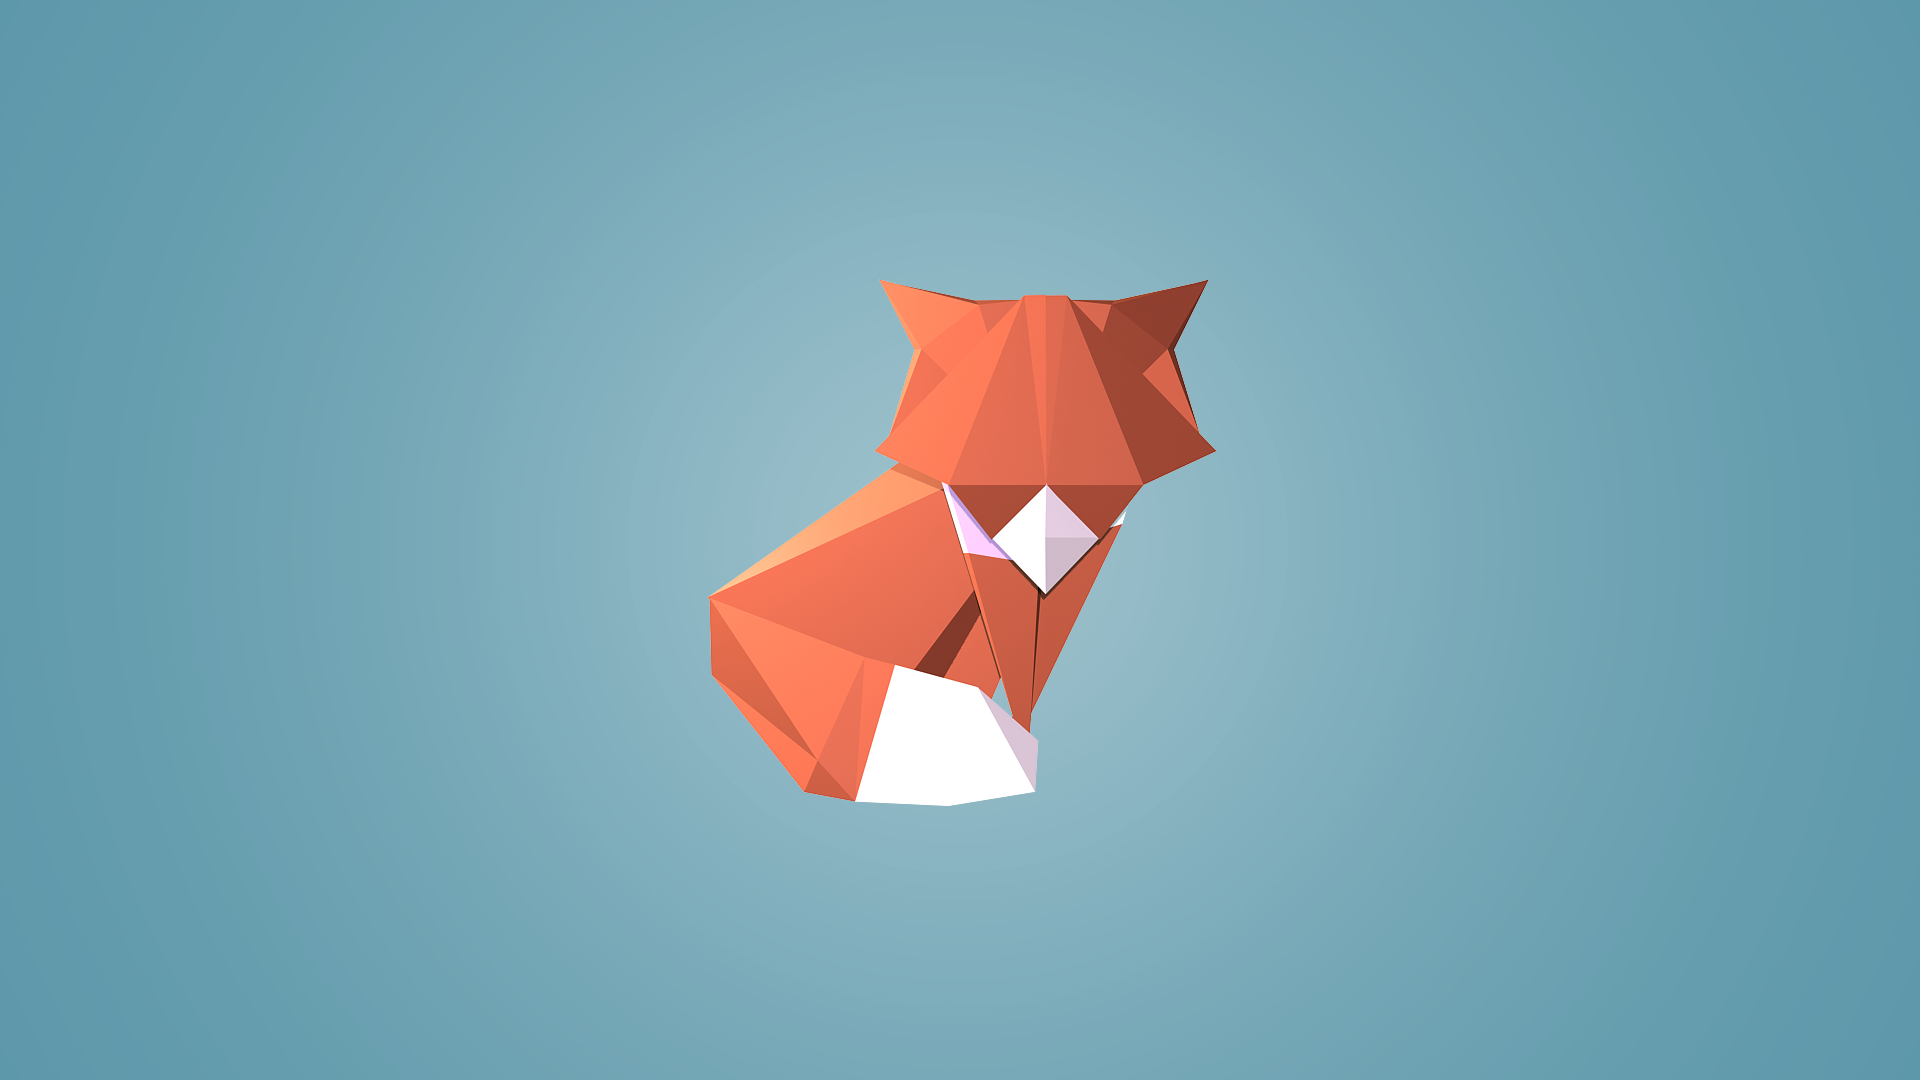 Sketch/artorigami Fox - Simple Low Poly , HD Wallpaper & Backgrounds